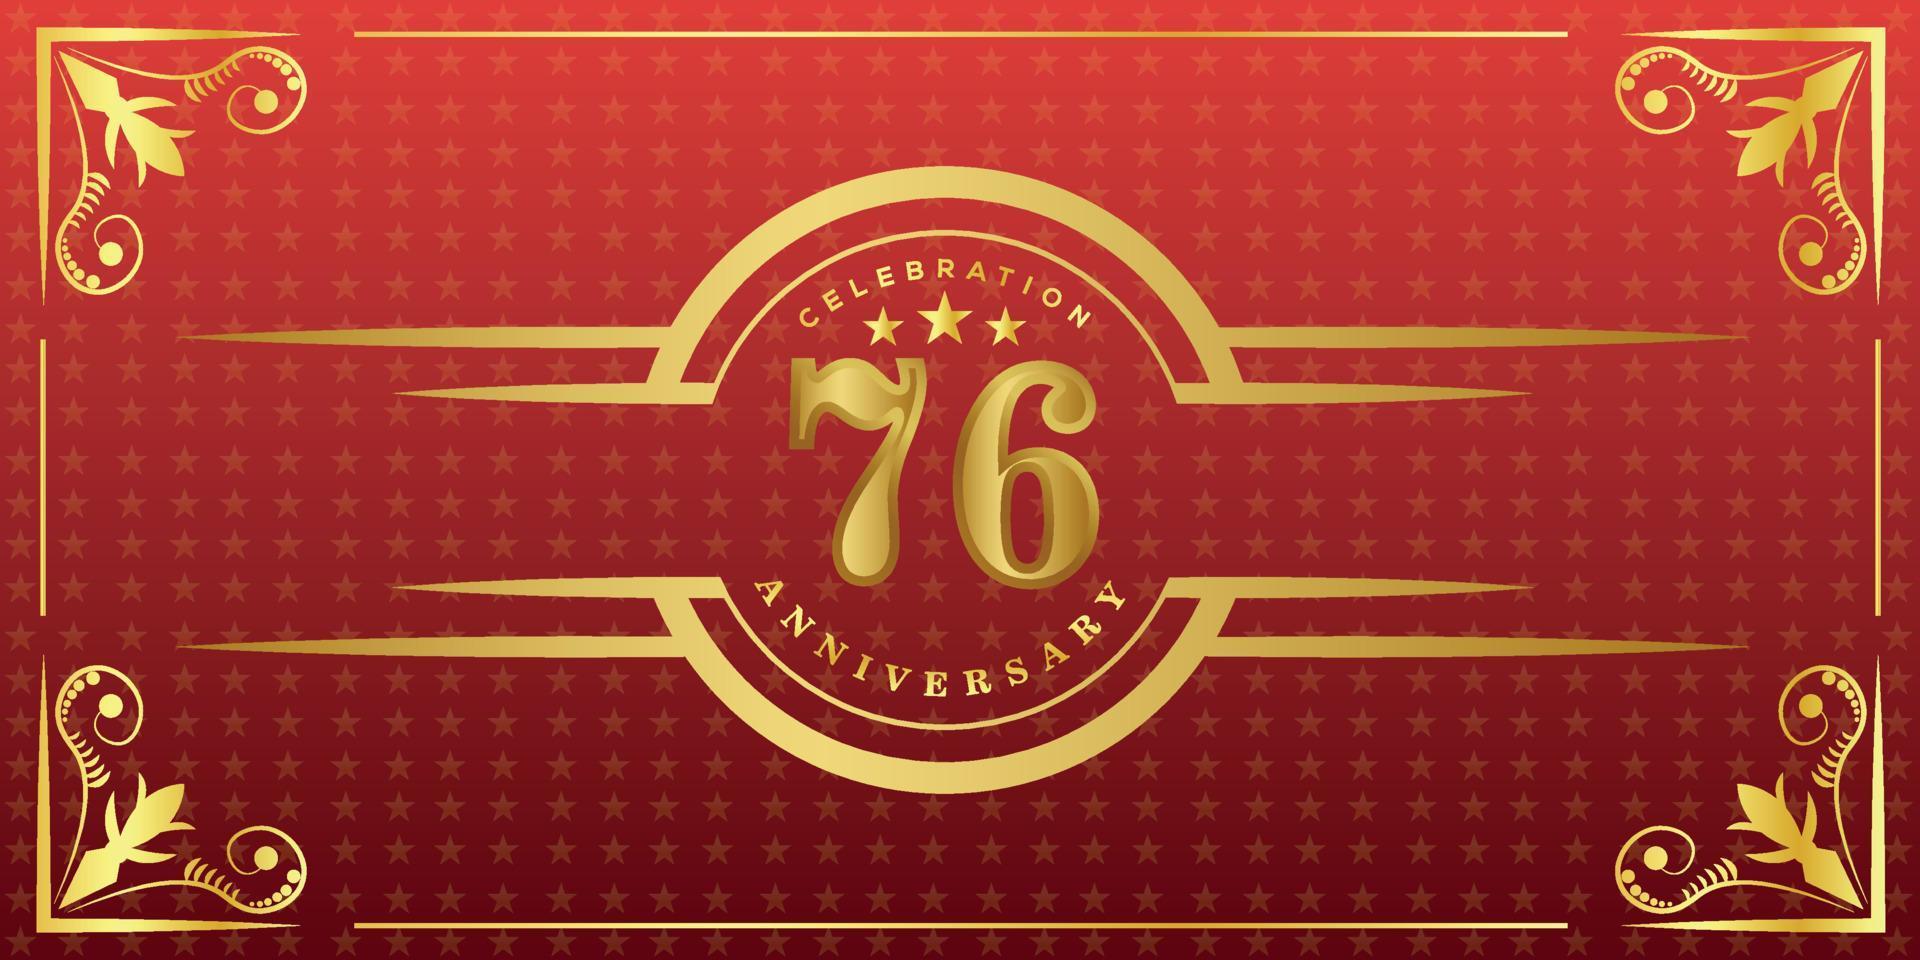 76th anniversary logo with golden ring, confetti and gold border isolated on elegant red background, sparkle, vector design for greeting card and invitation card